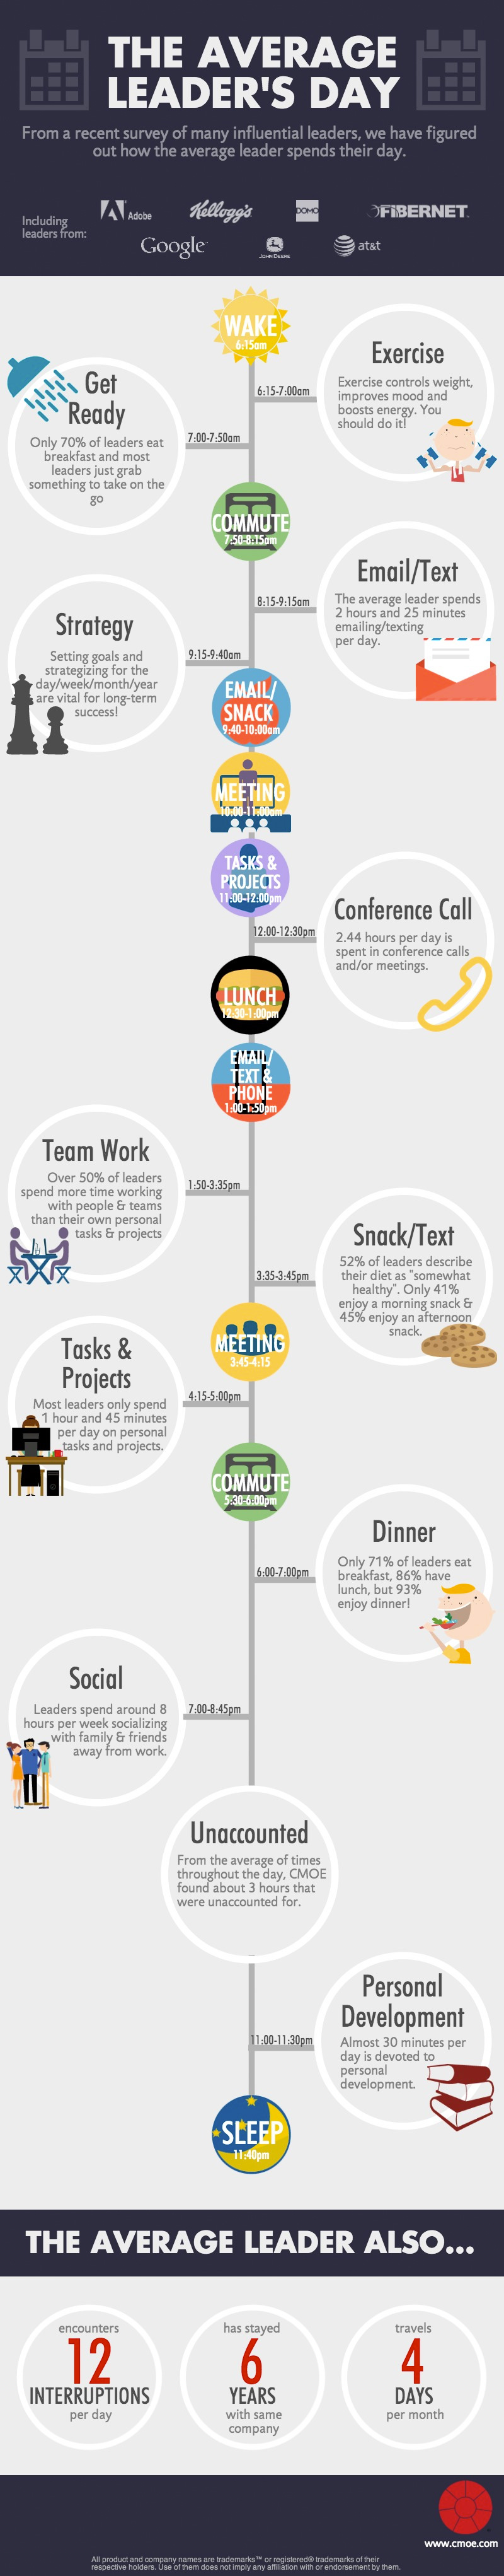 How fortune 500 leaders spend their day infographic